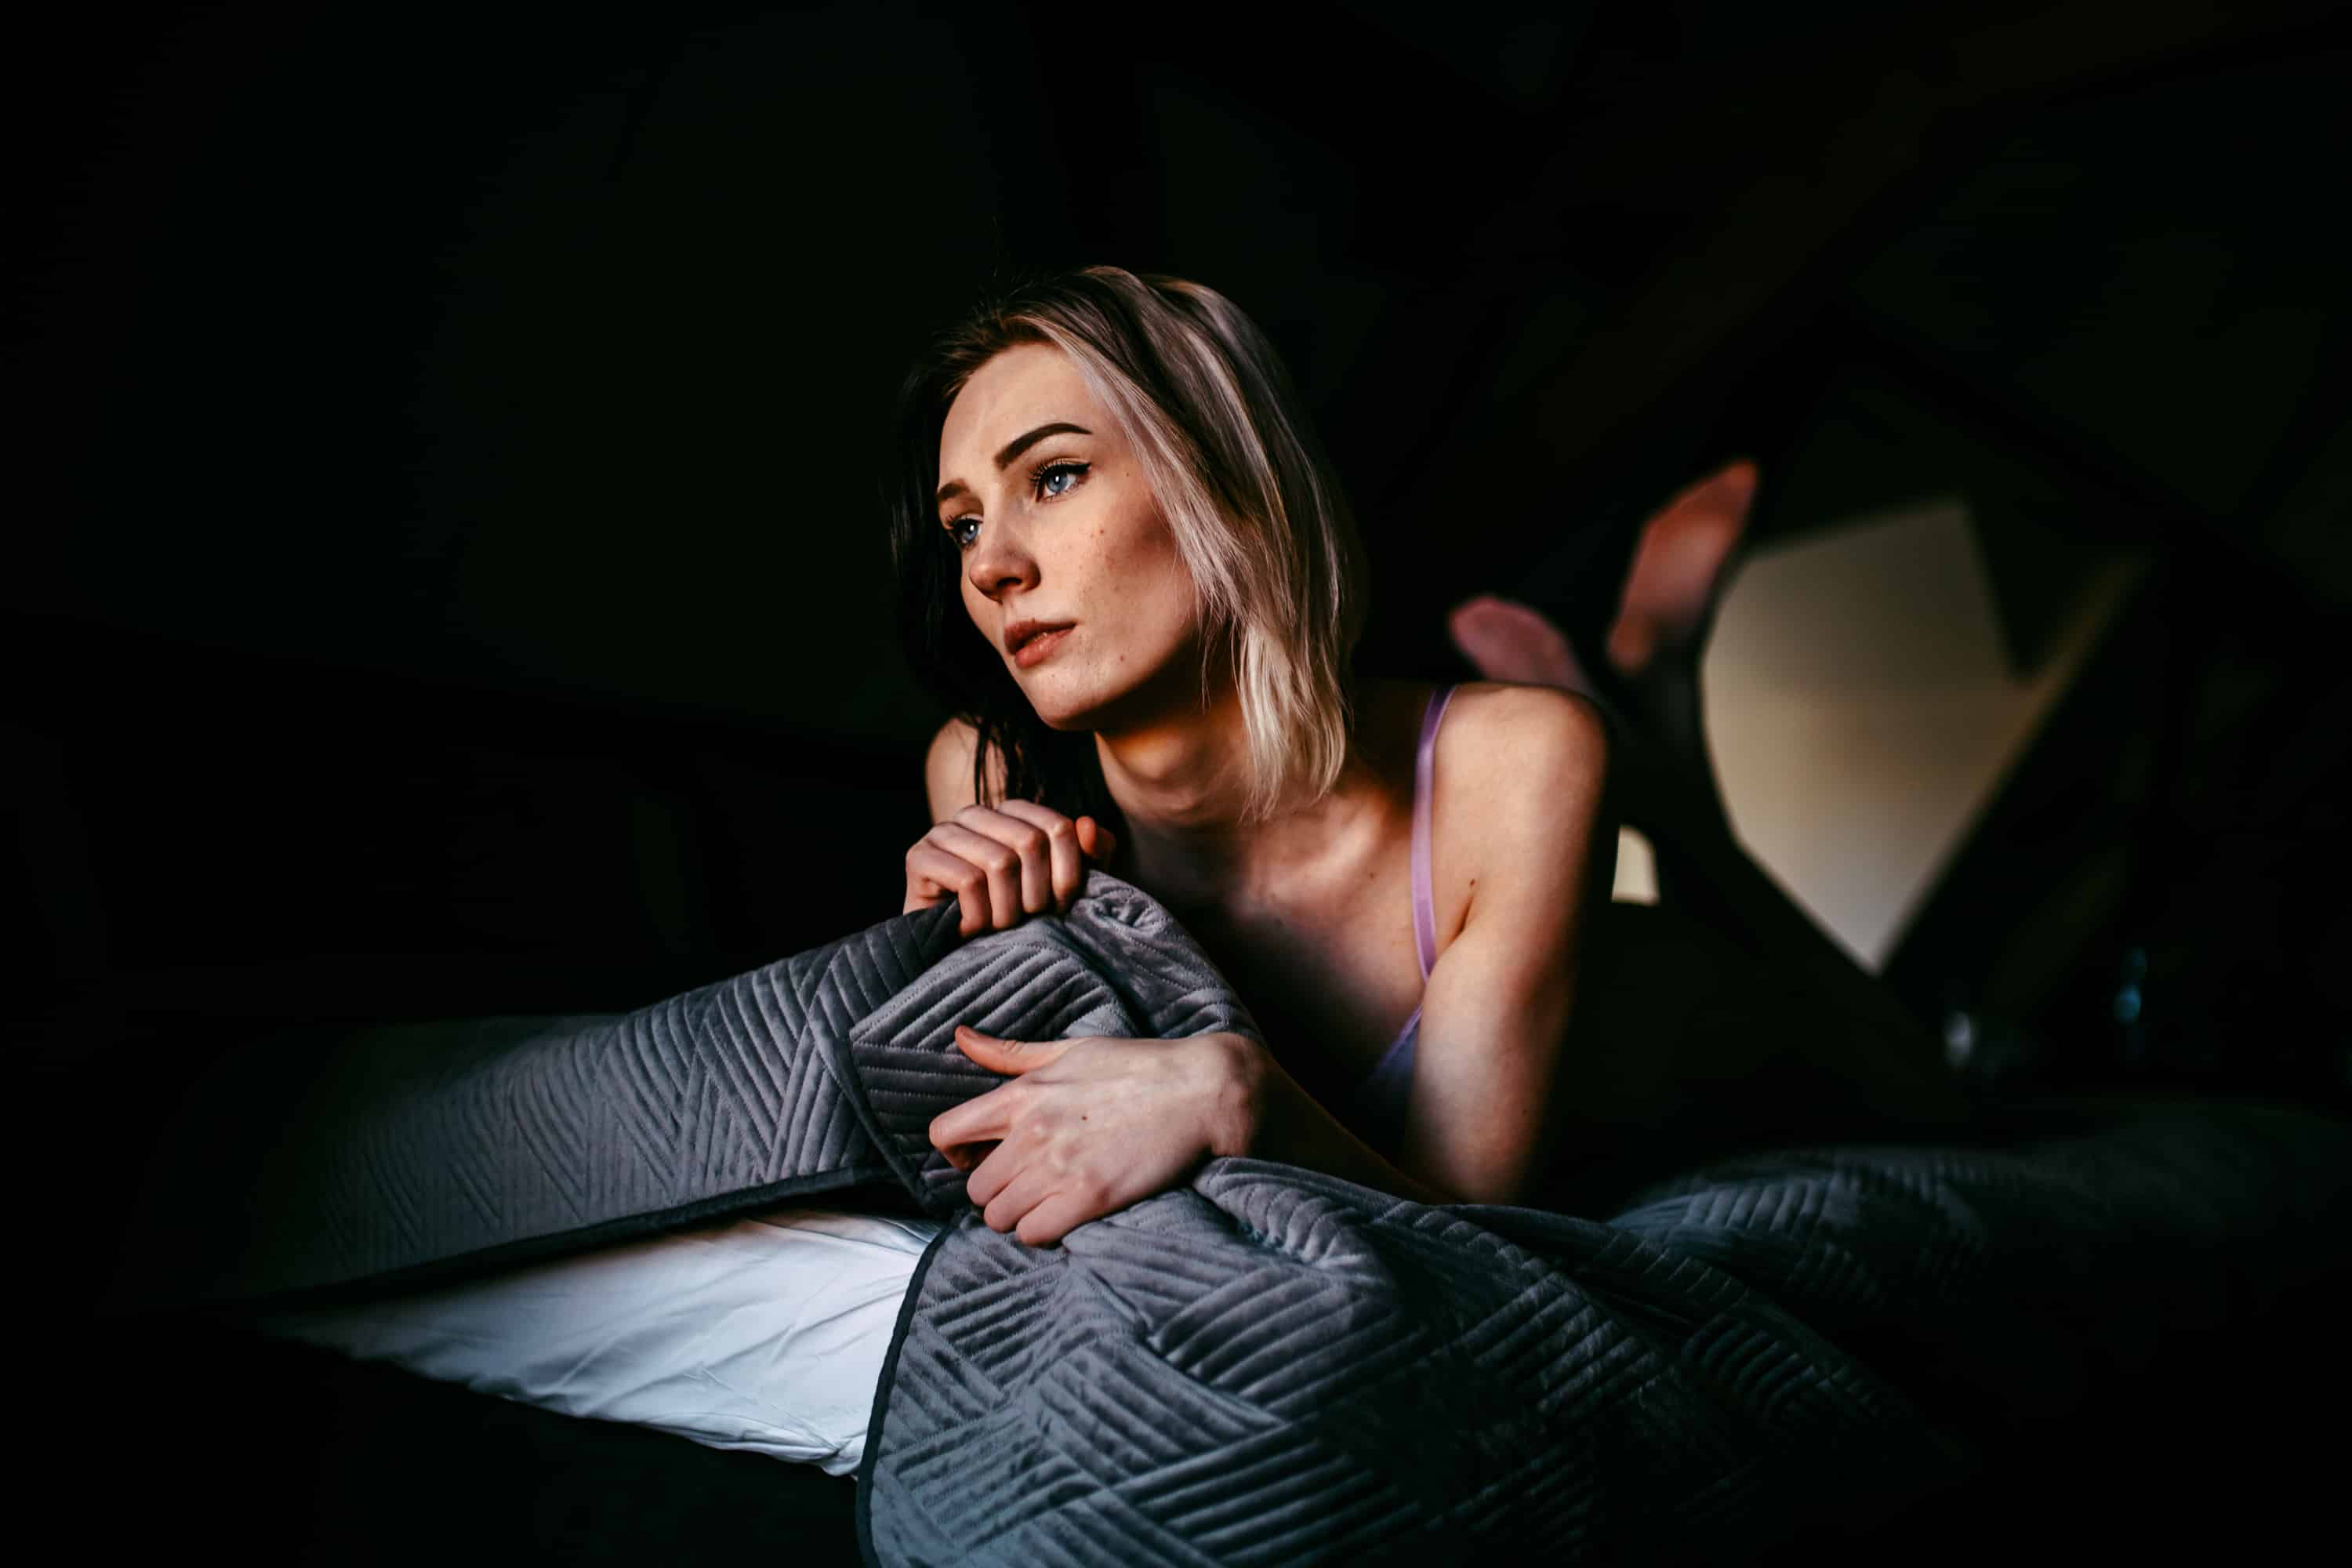 A woman doing a boudoir shoot in the dark bed.